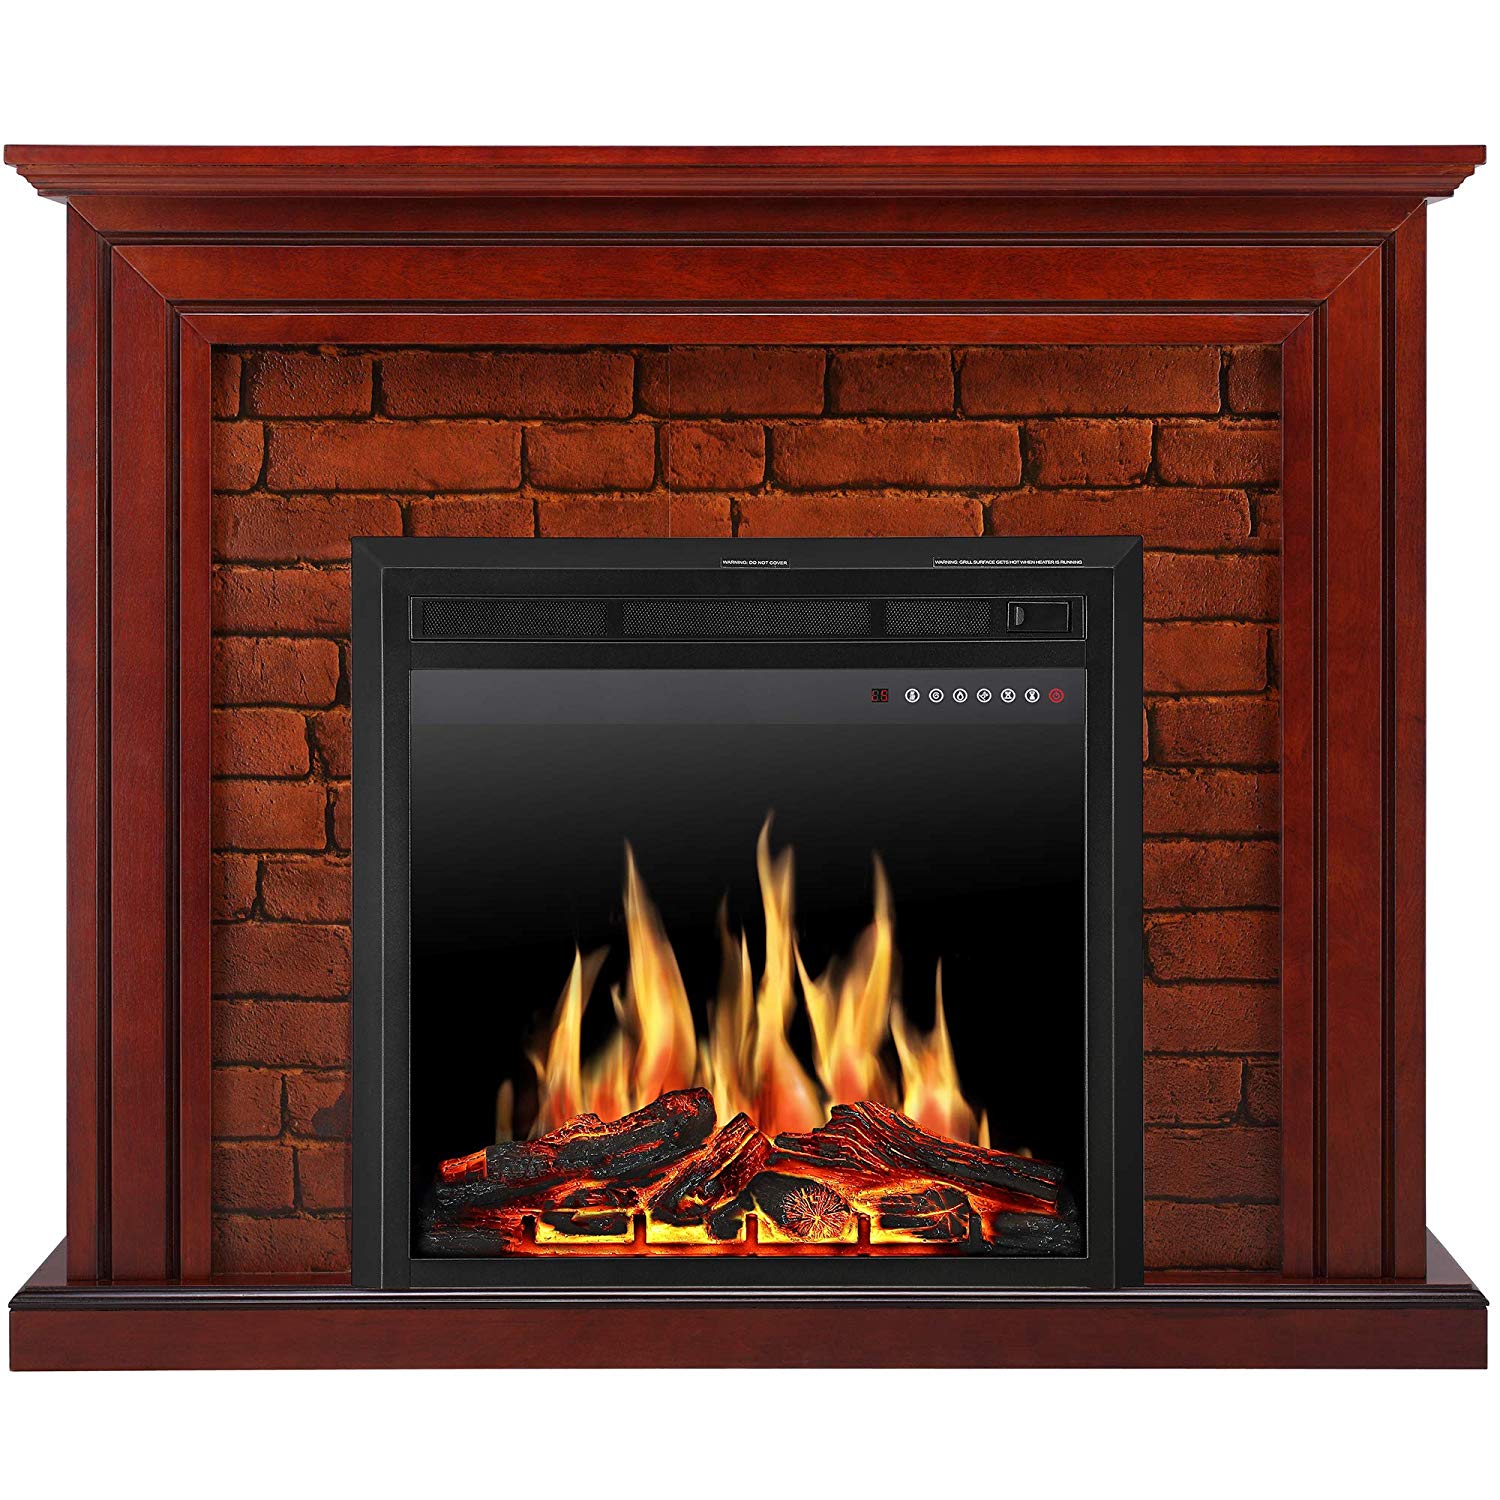 Infrared Electric Fireplace Tv Stand Best Of Jamfly Electric Fireplace Mantel Package Traditional Brick Wall Design Heater with Remote Control and Led touch Screen Home Accent Furnishings